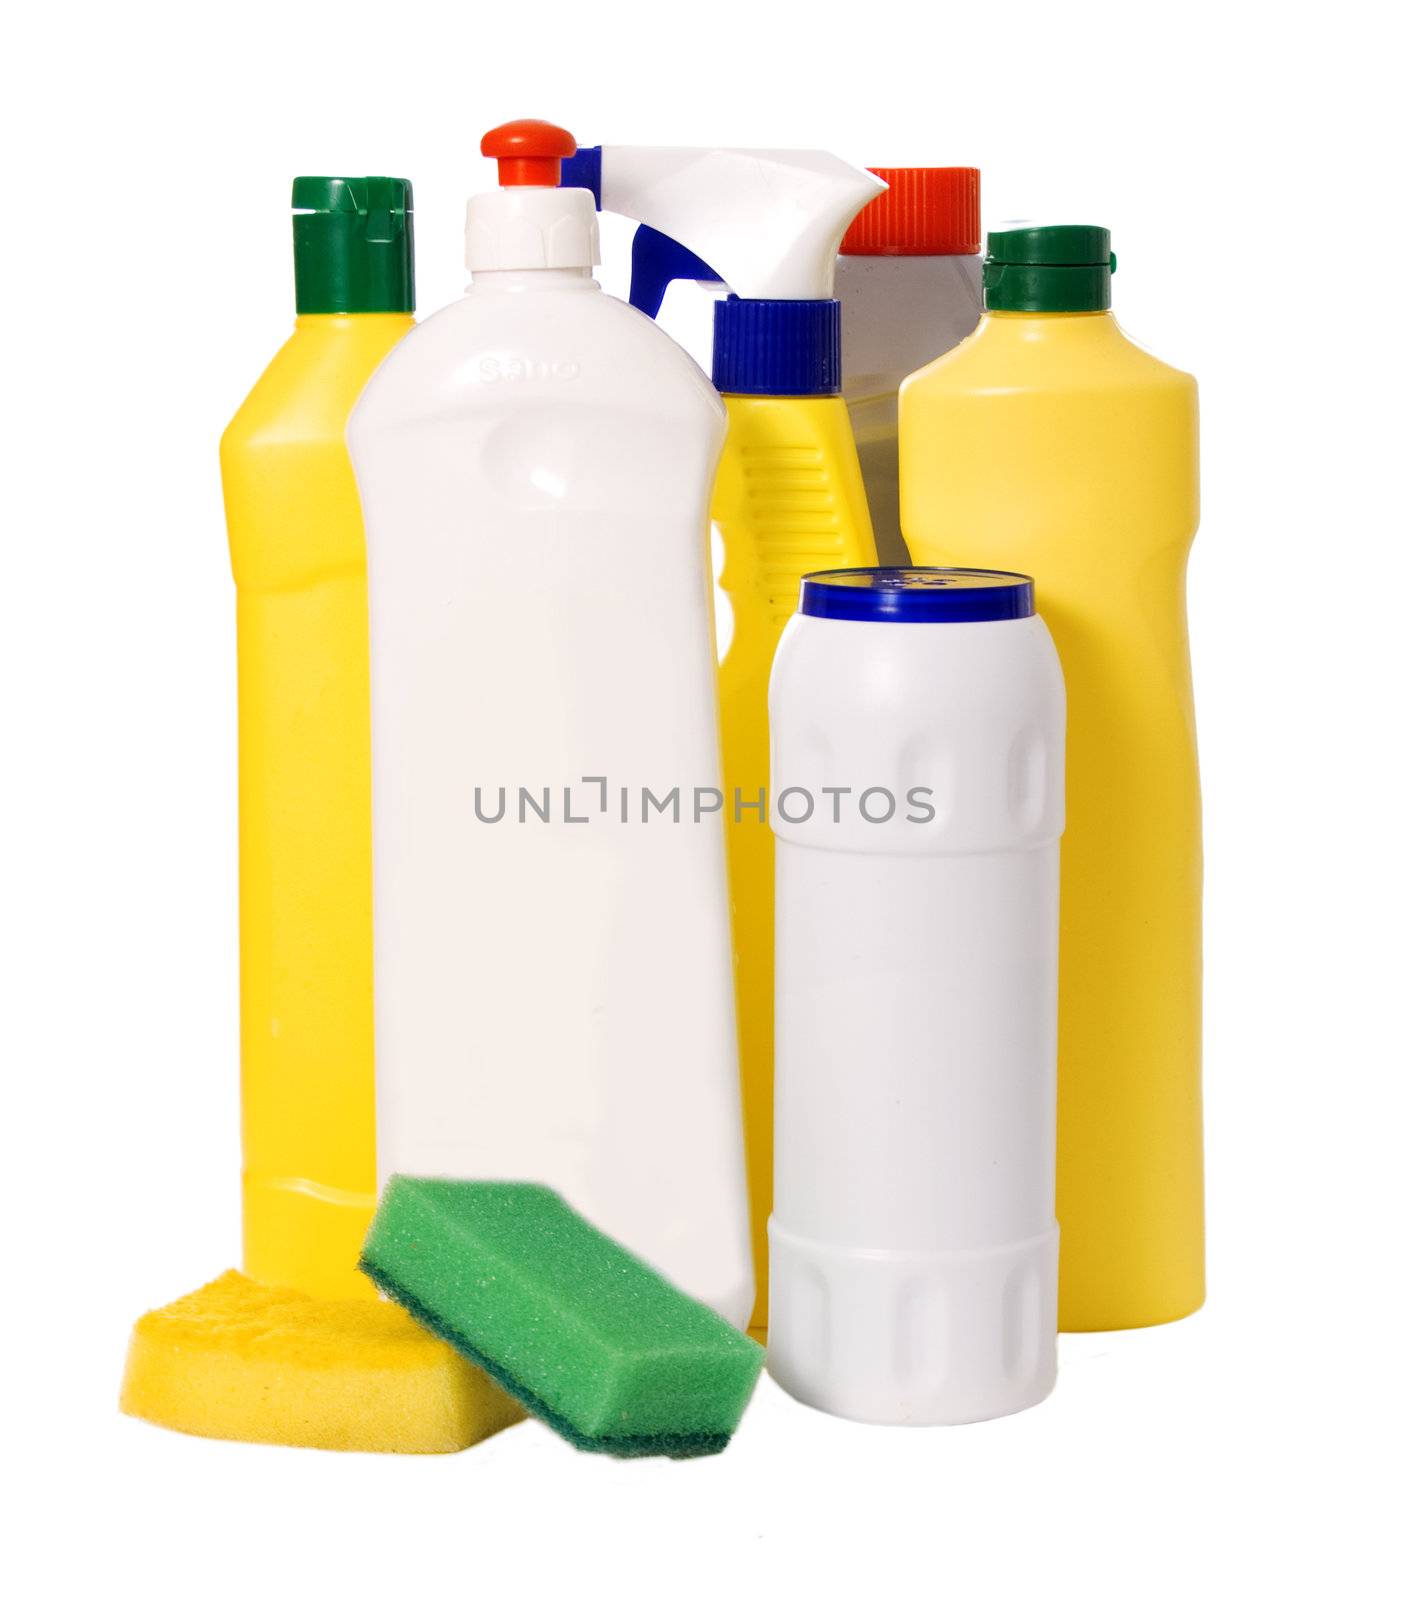 detergent bottles and sponges isolated on white